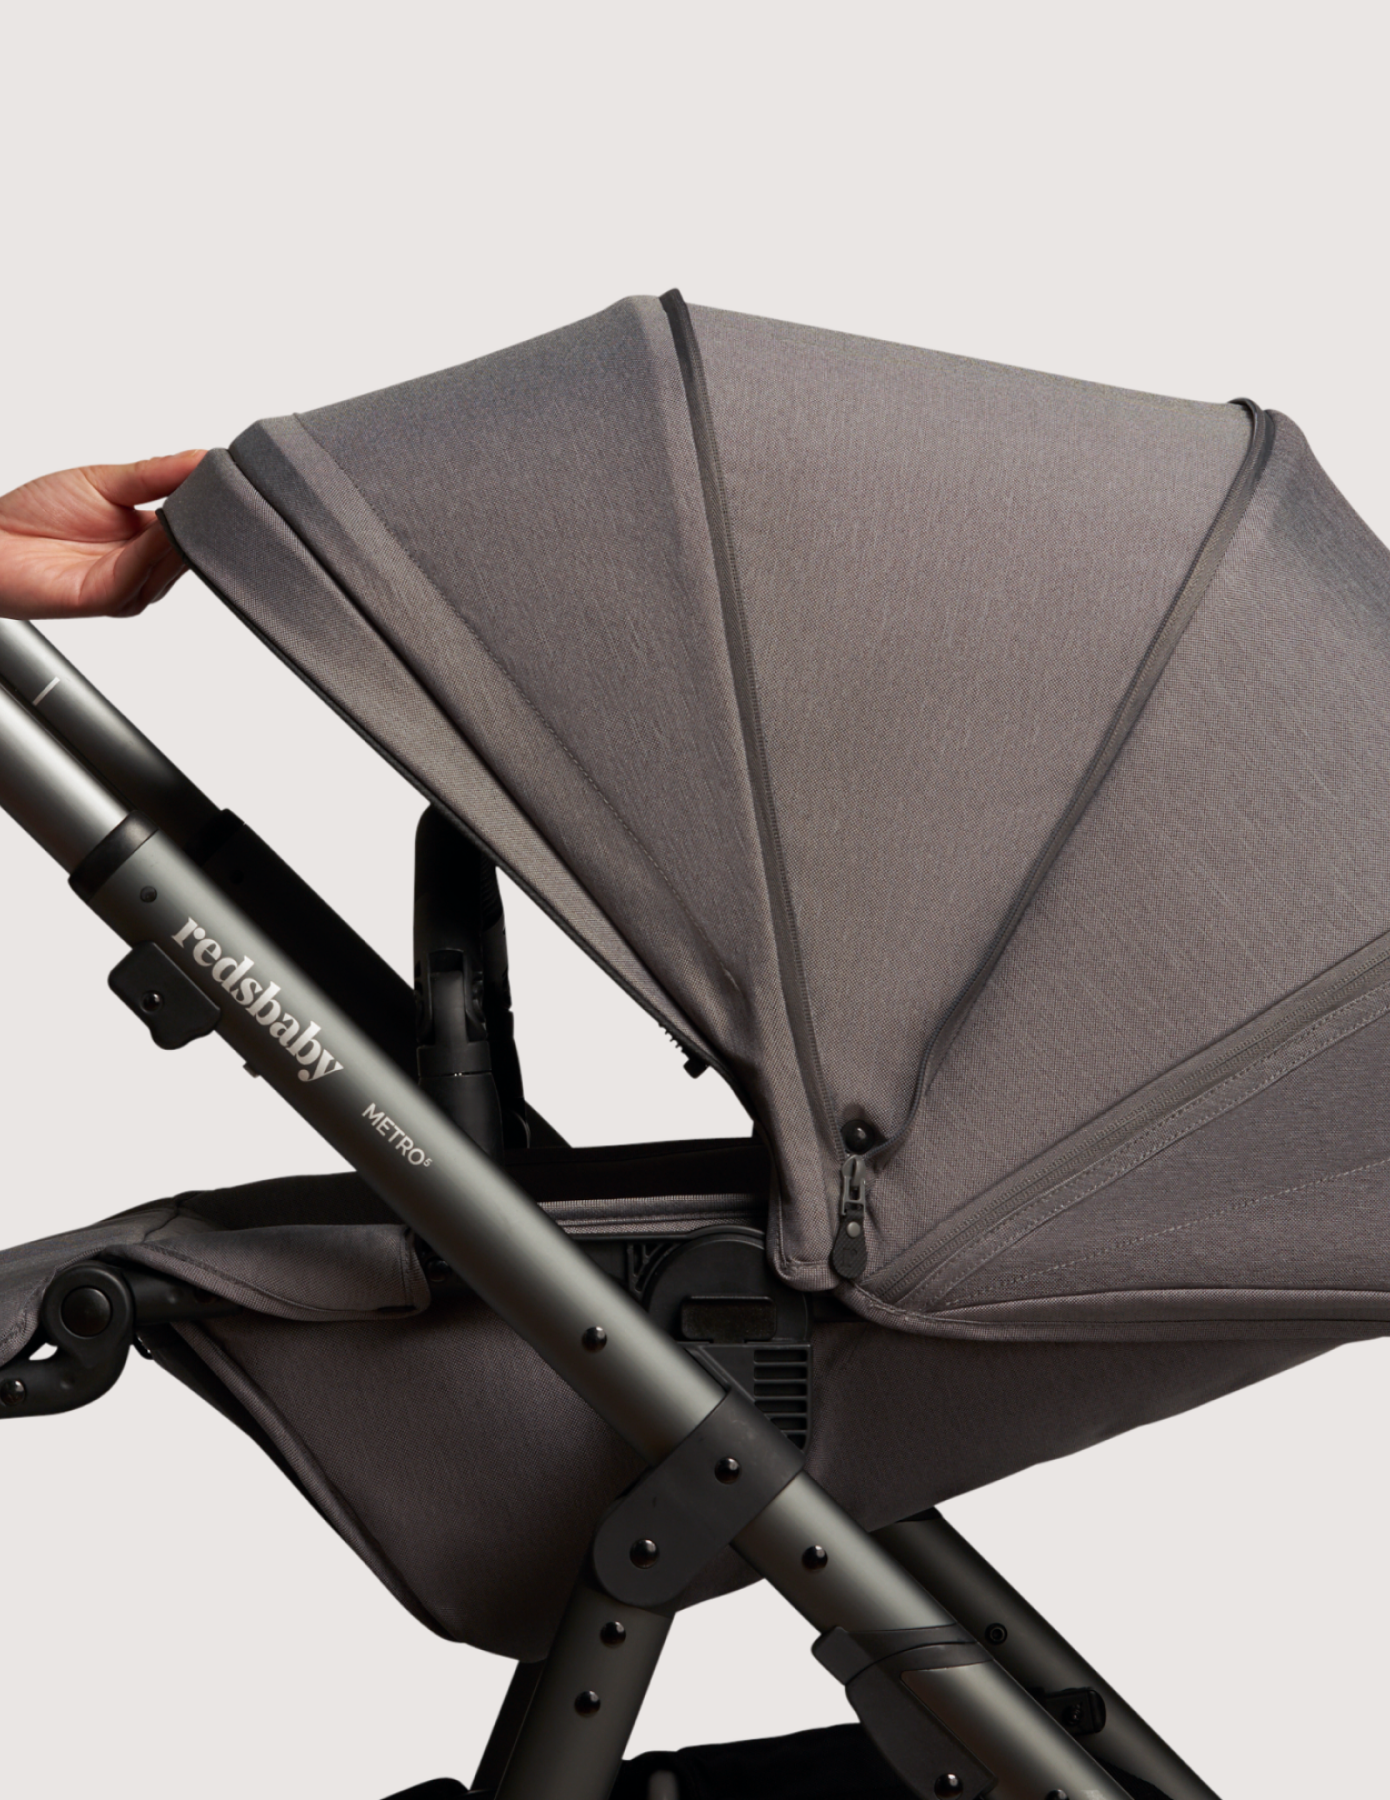 Redsbaby pram with a hand opening the canopy